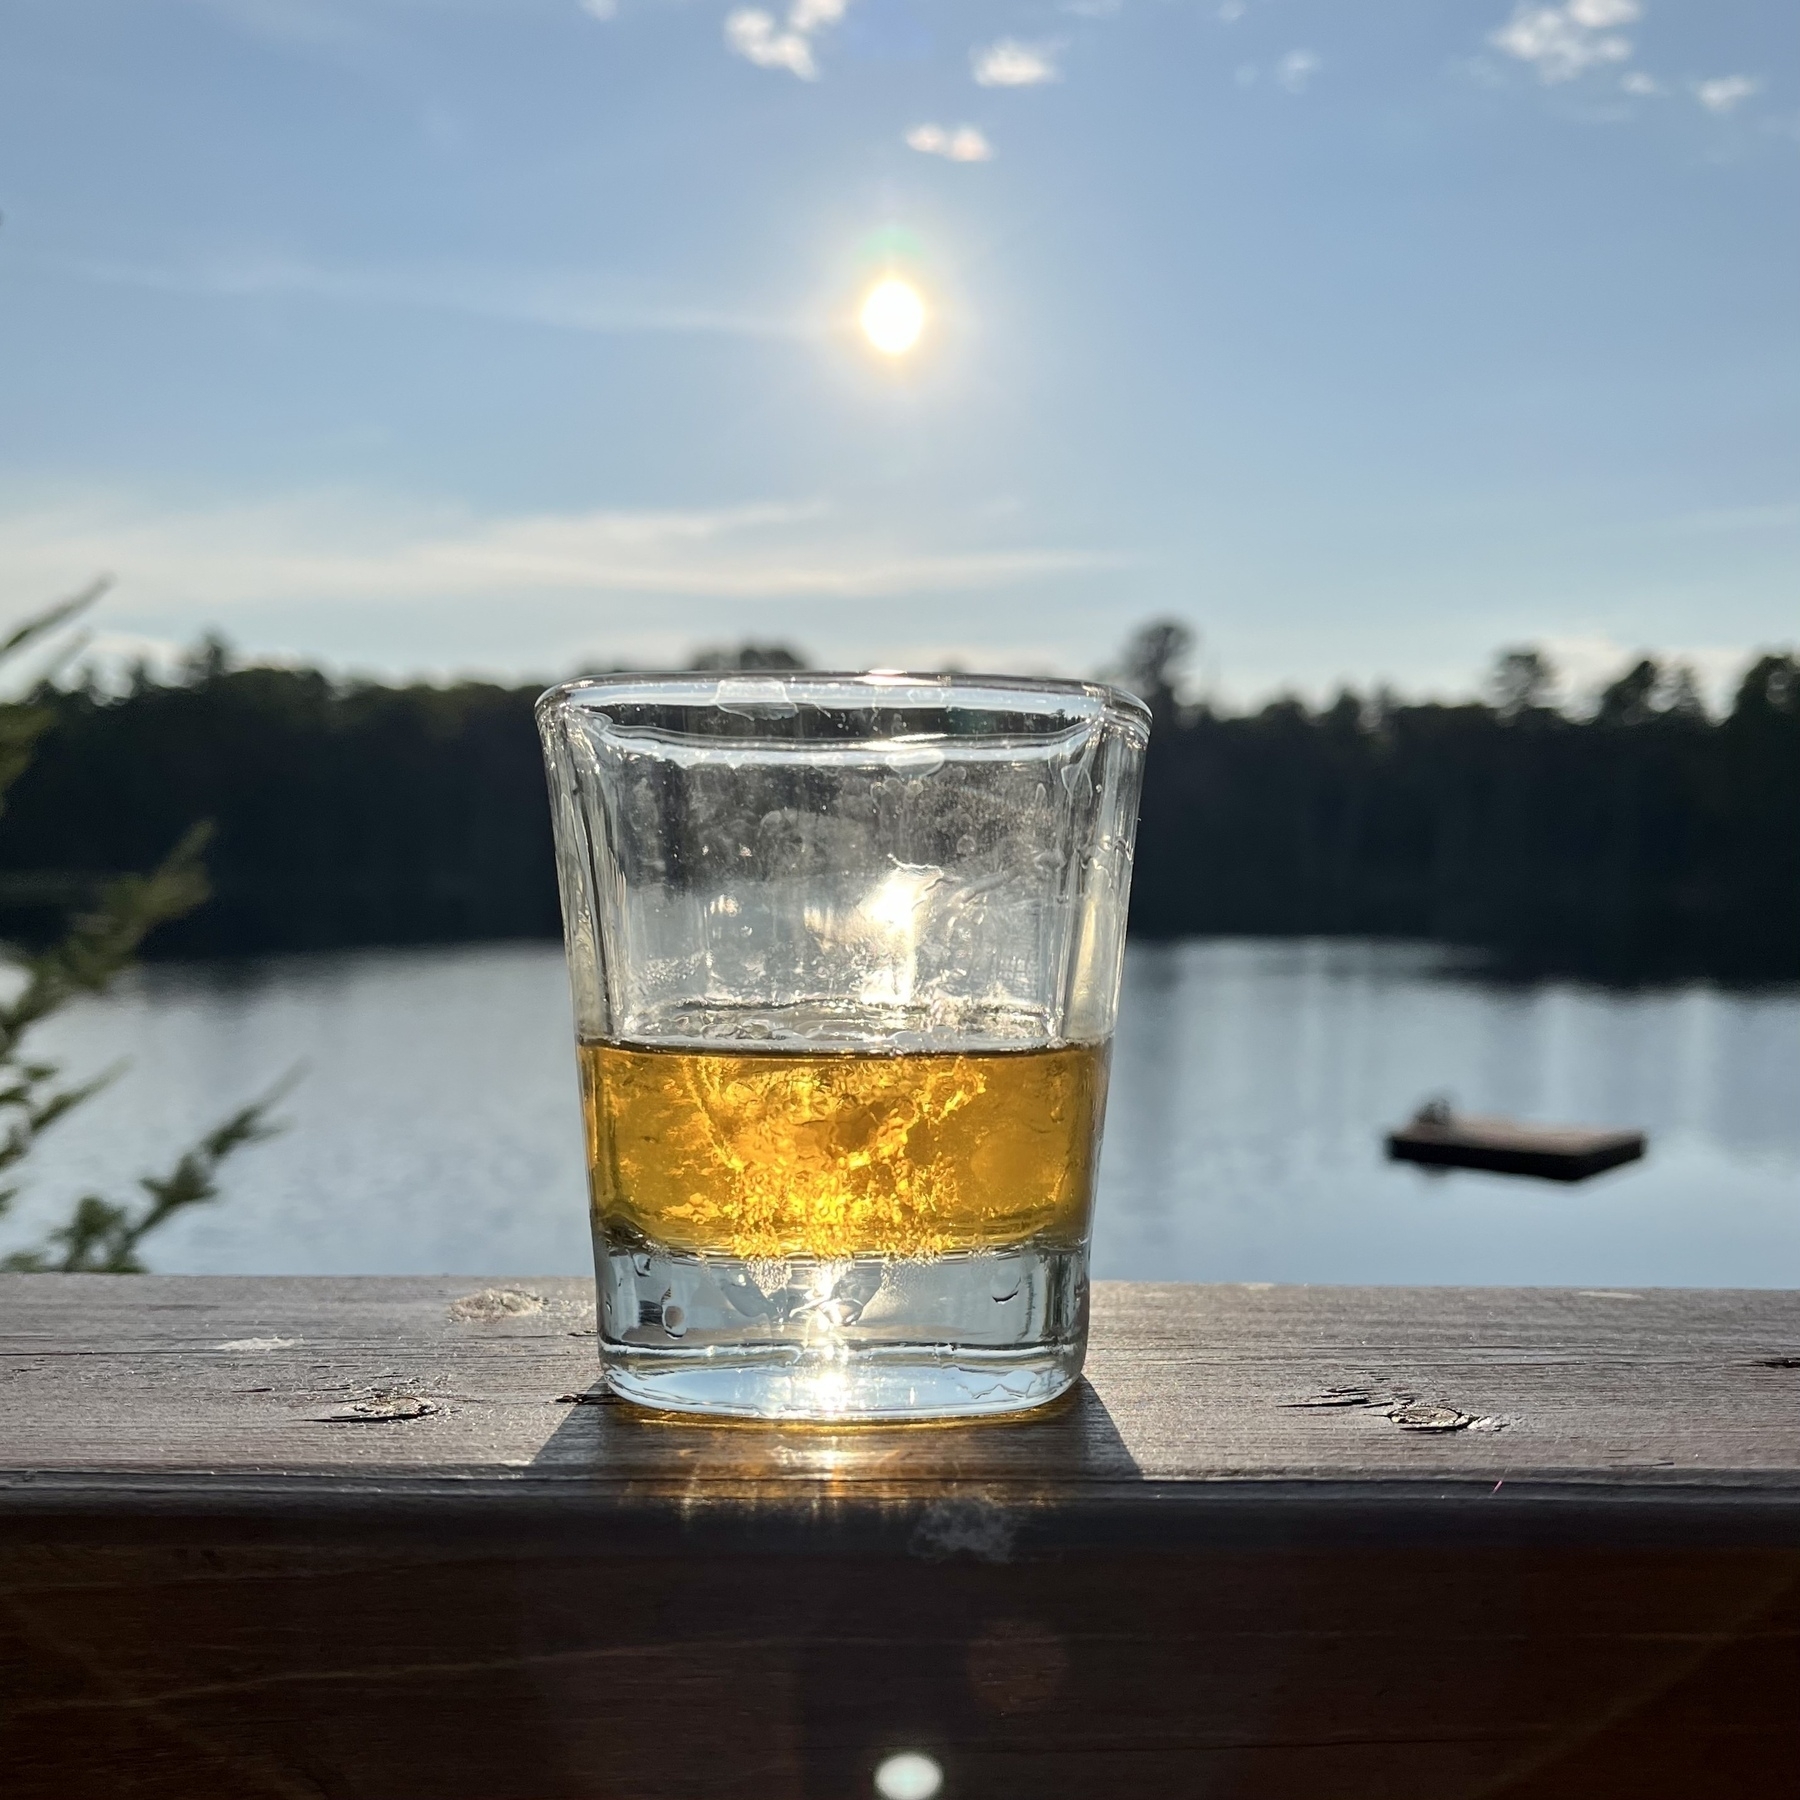 Sun starting to set with a scotch in the foreground 